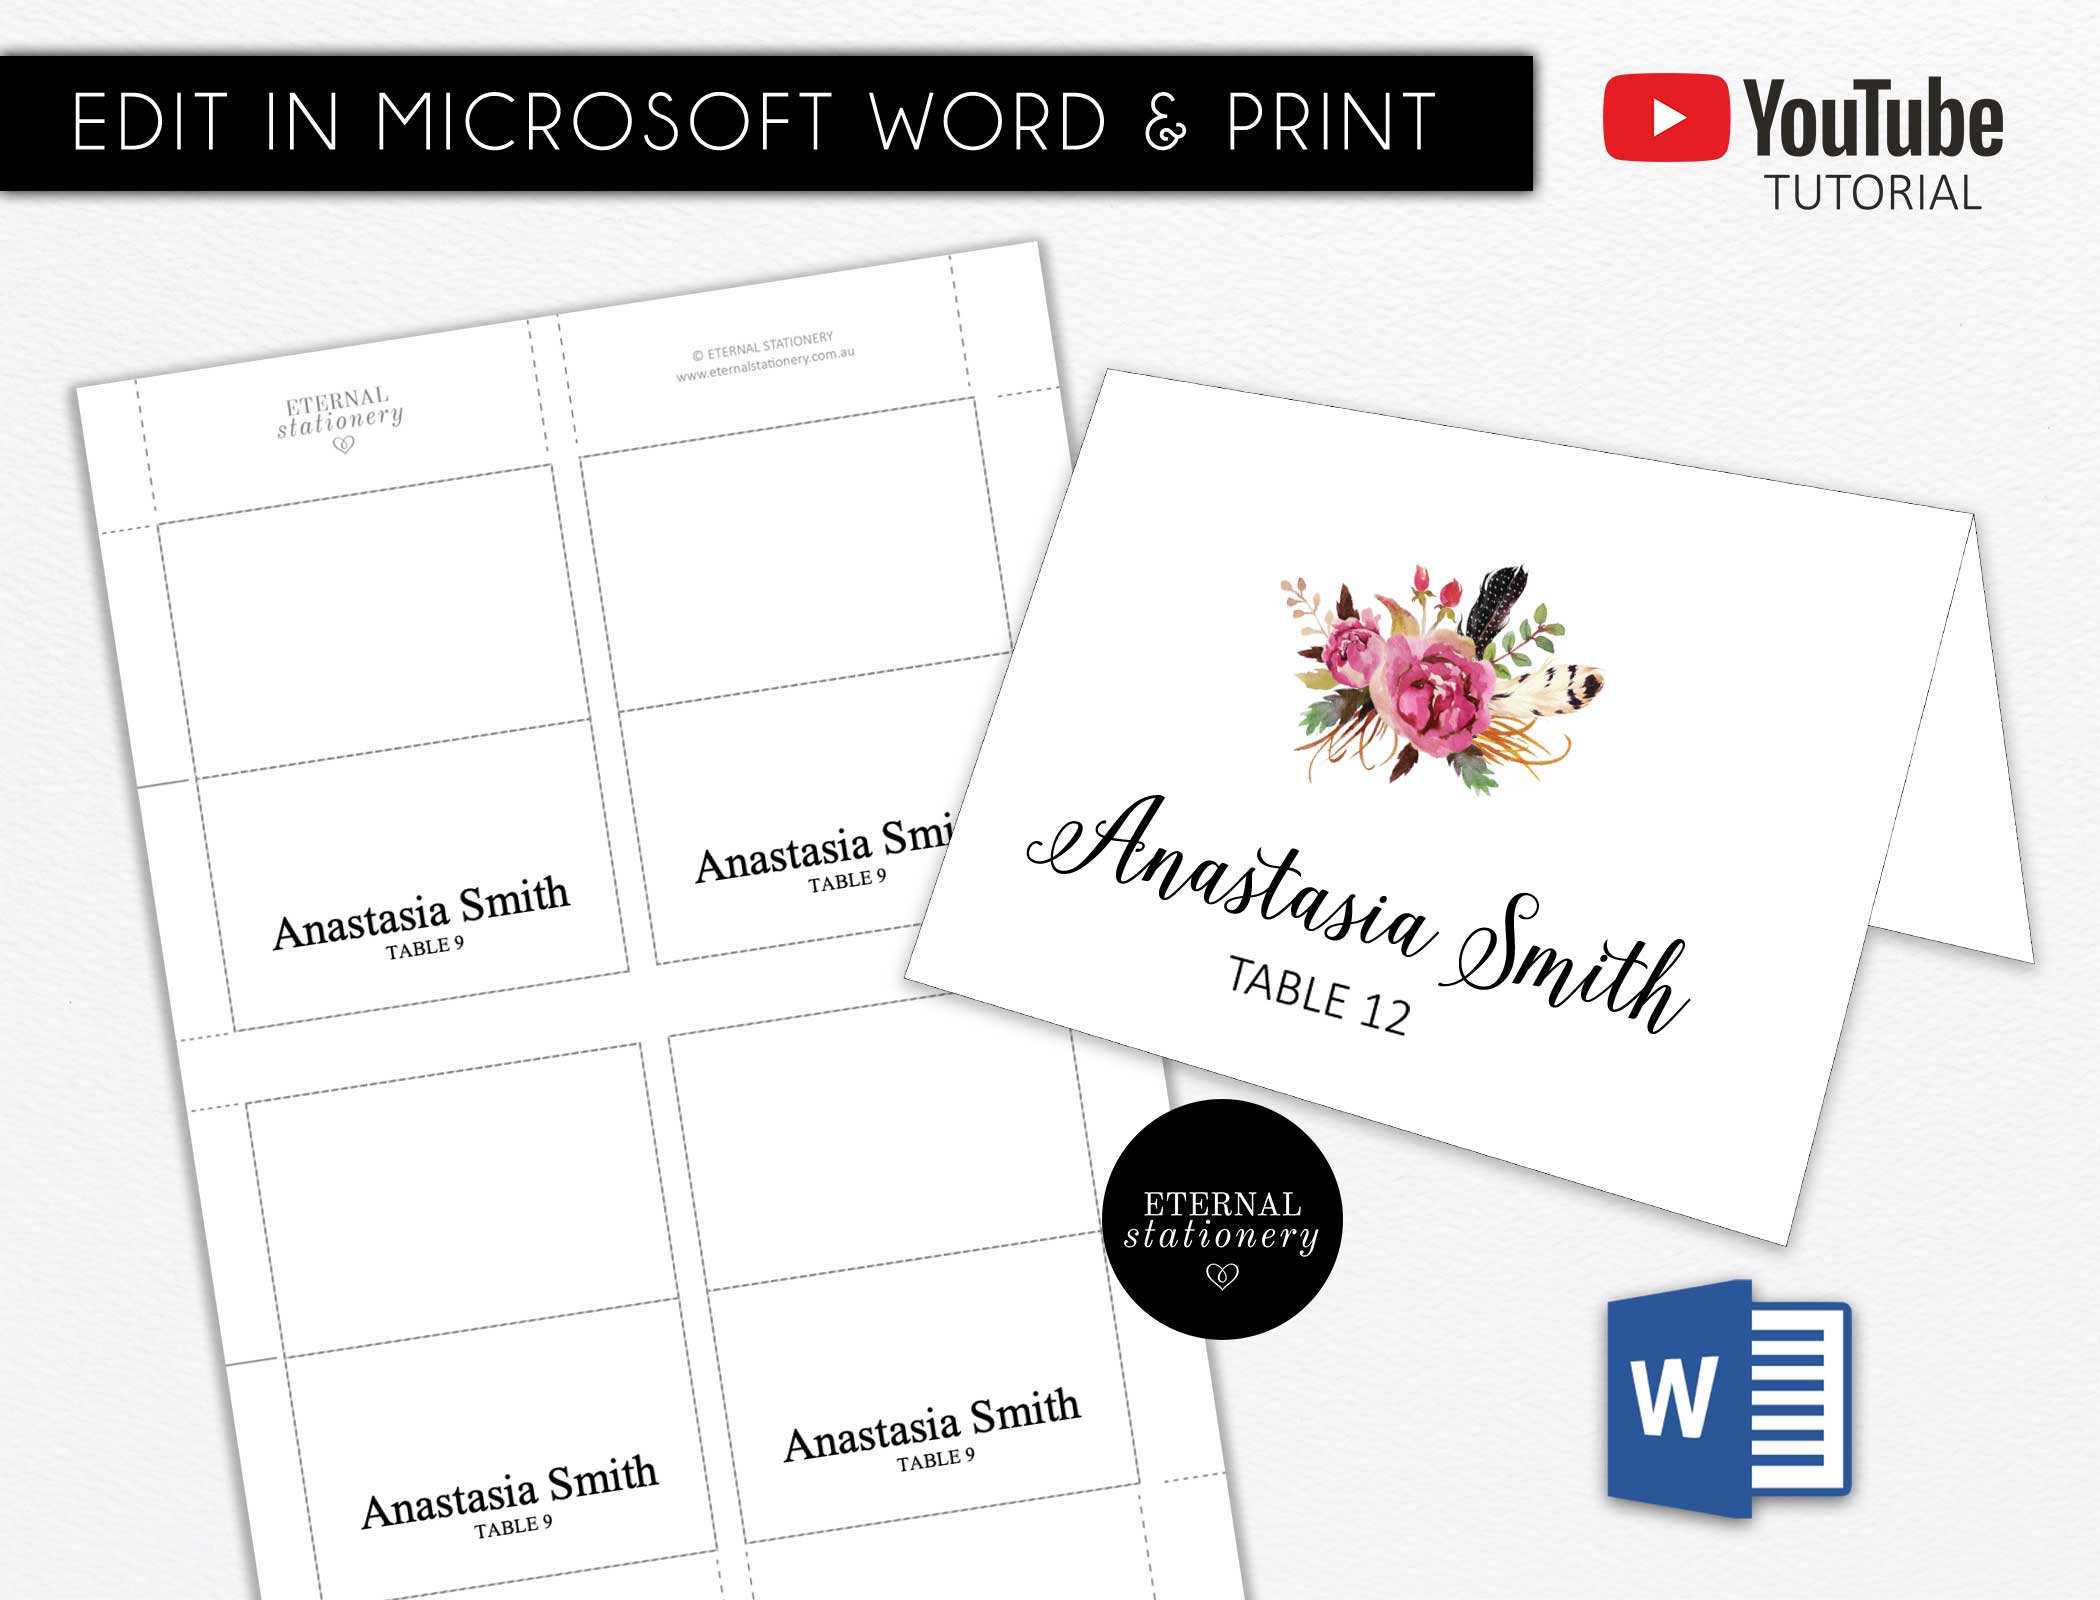 Diy Editable Microsoft Word Place Card Template, Wedding Place Card, Tent  Card, Engagement, Corporate Place Card, Escort Card, Pc 01 Inside Microsoft Word Place Card Template